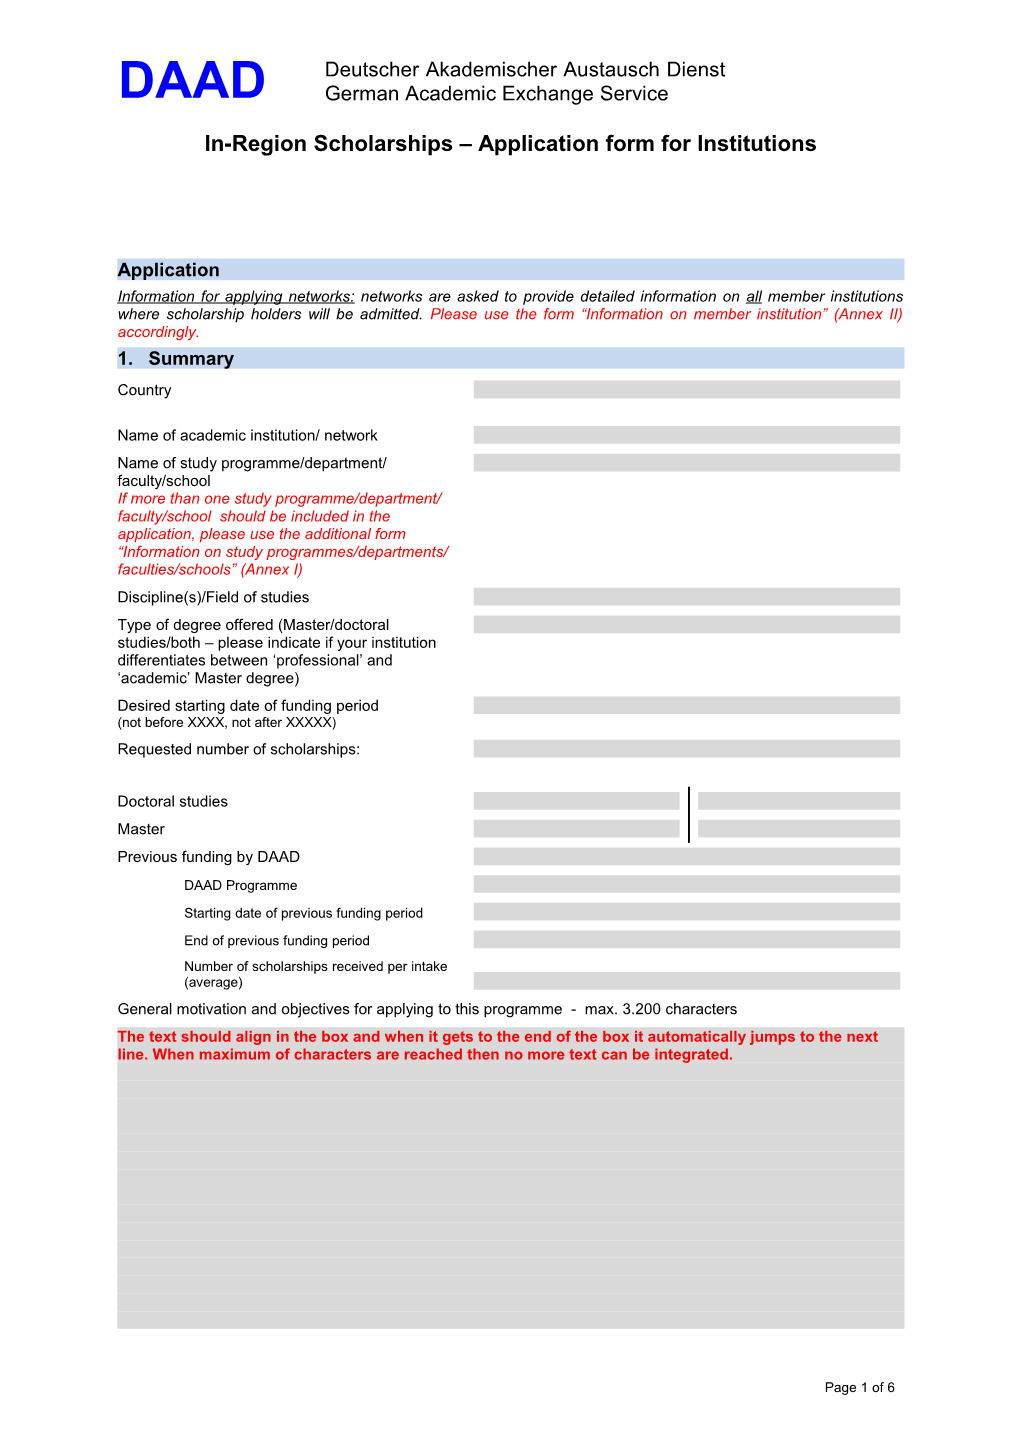 In-Country/In-Regionscholarships Application Form for Institutions